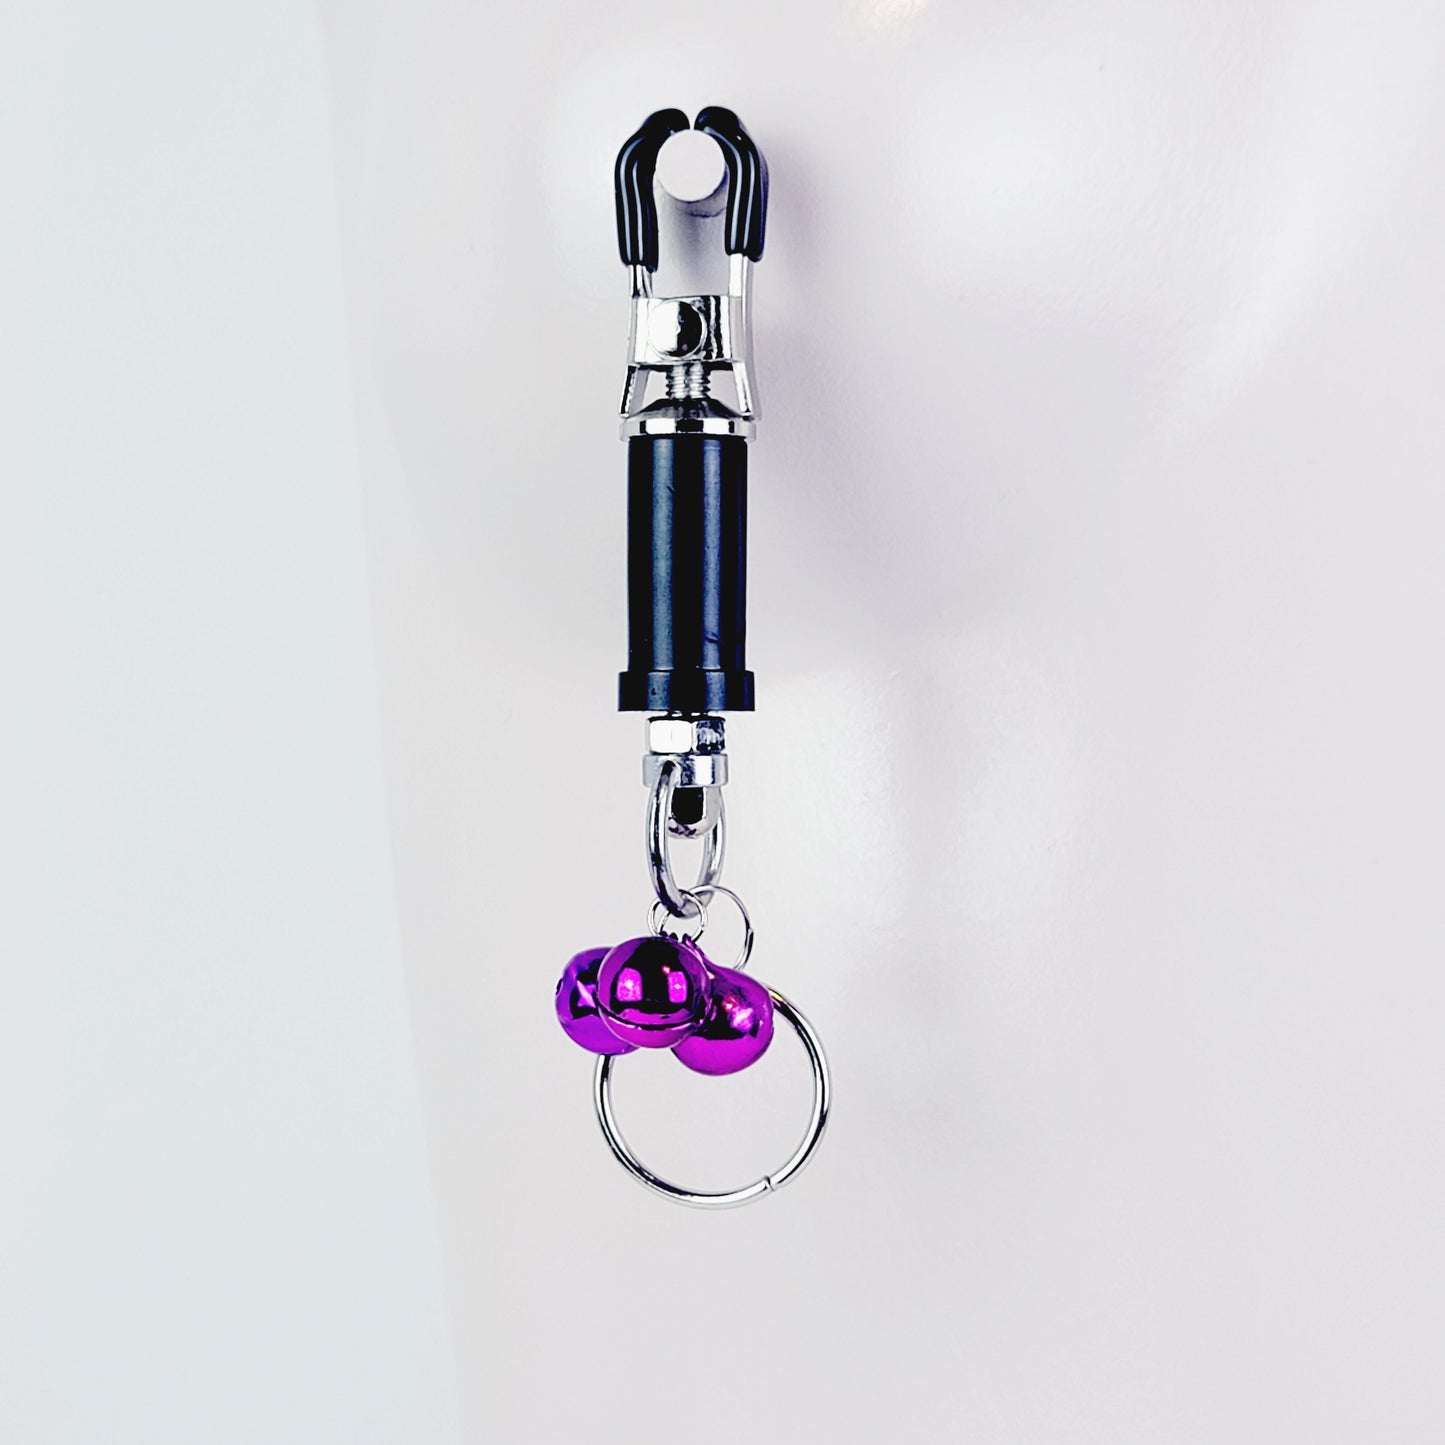 BDSM Nipple Clamps. Barrel Nipple Clamps with Bells and Pull Rings. MATURE